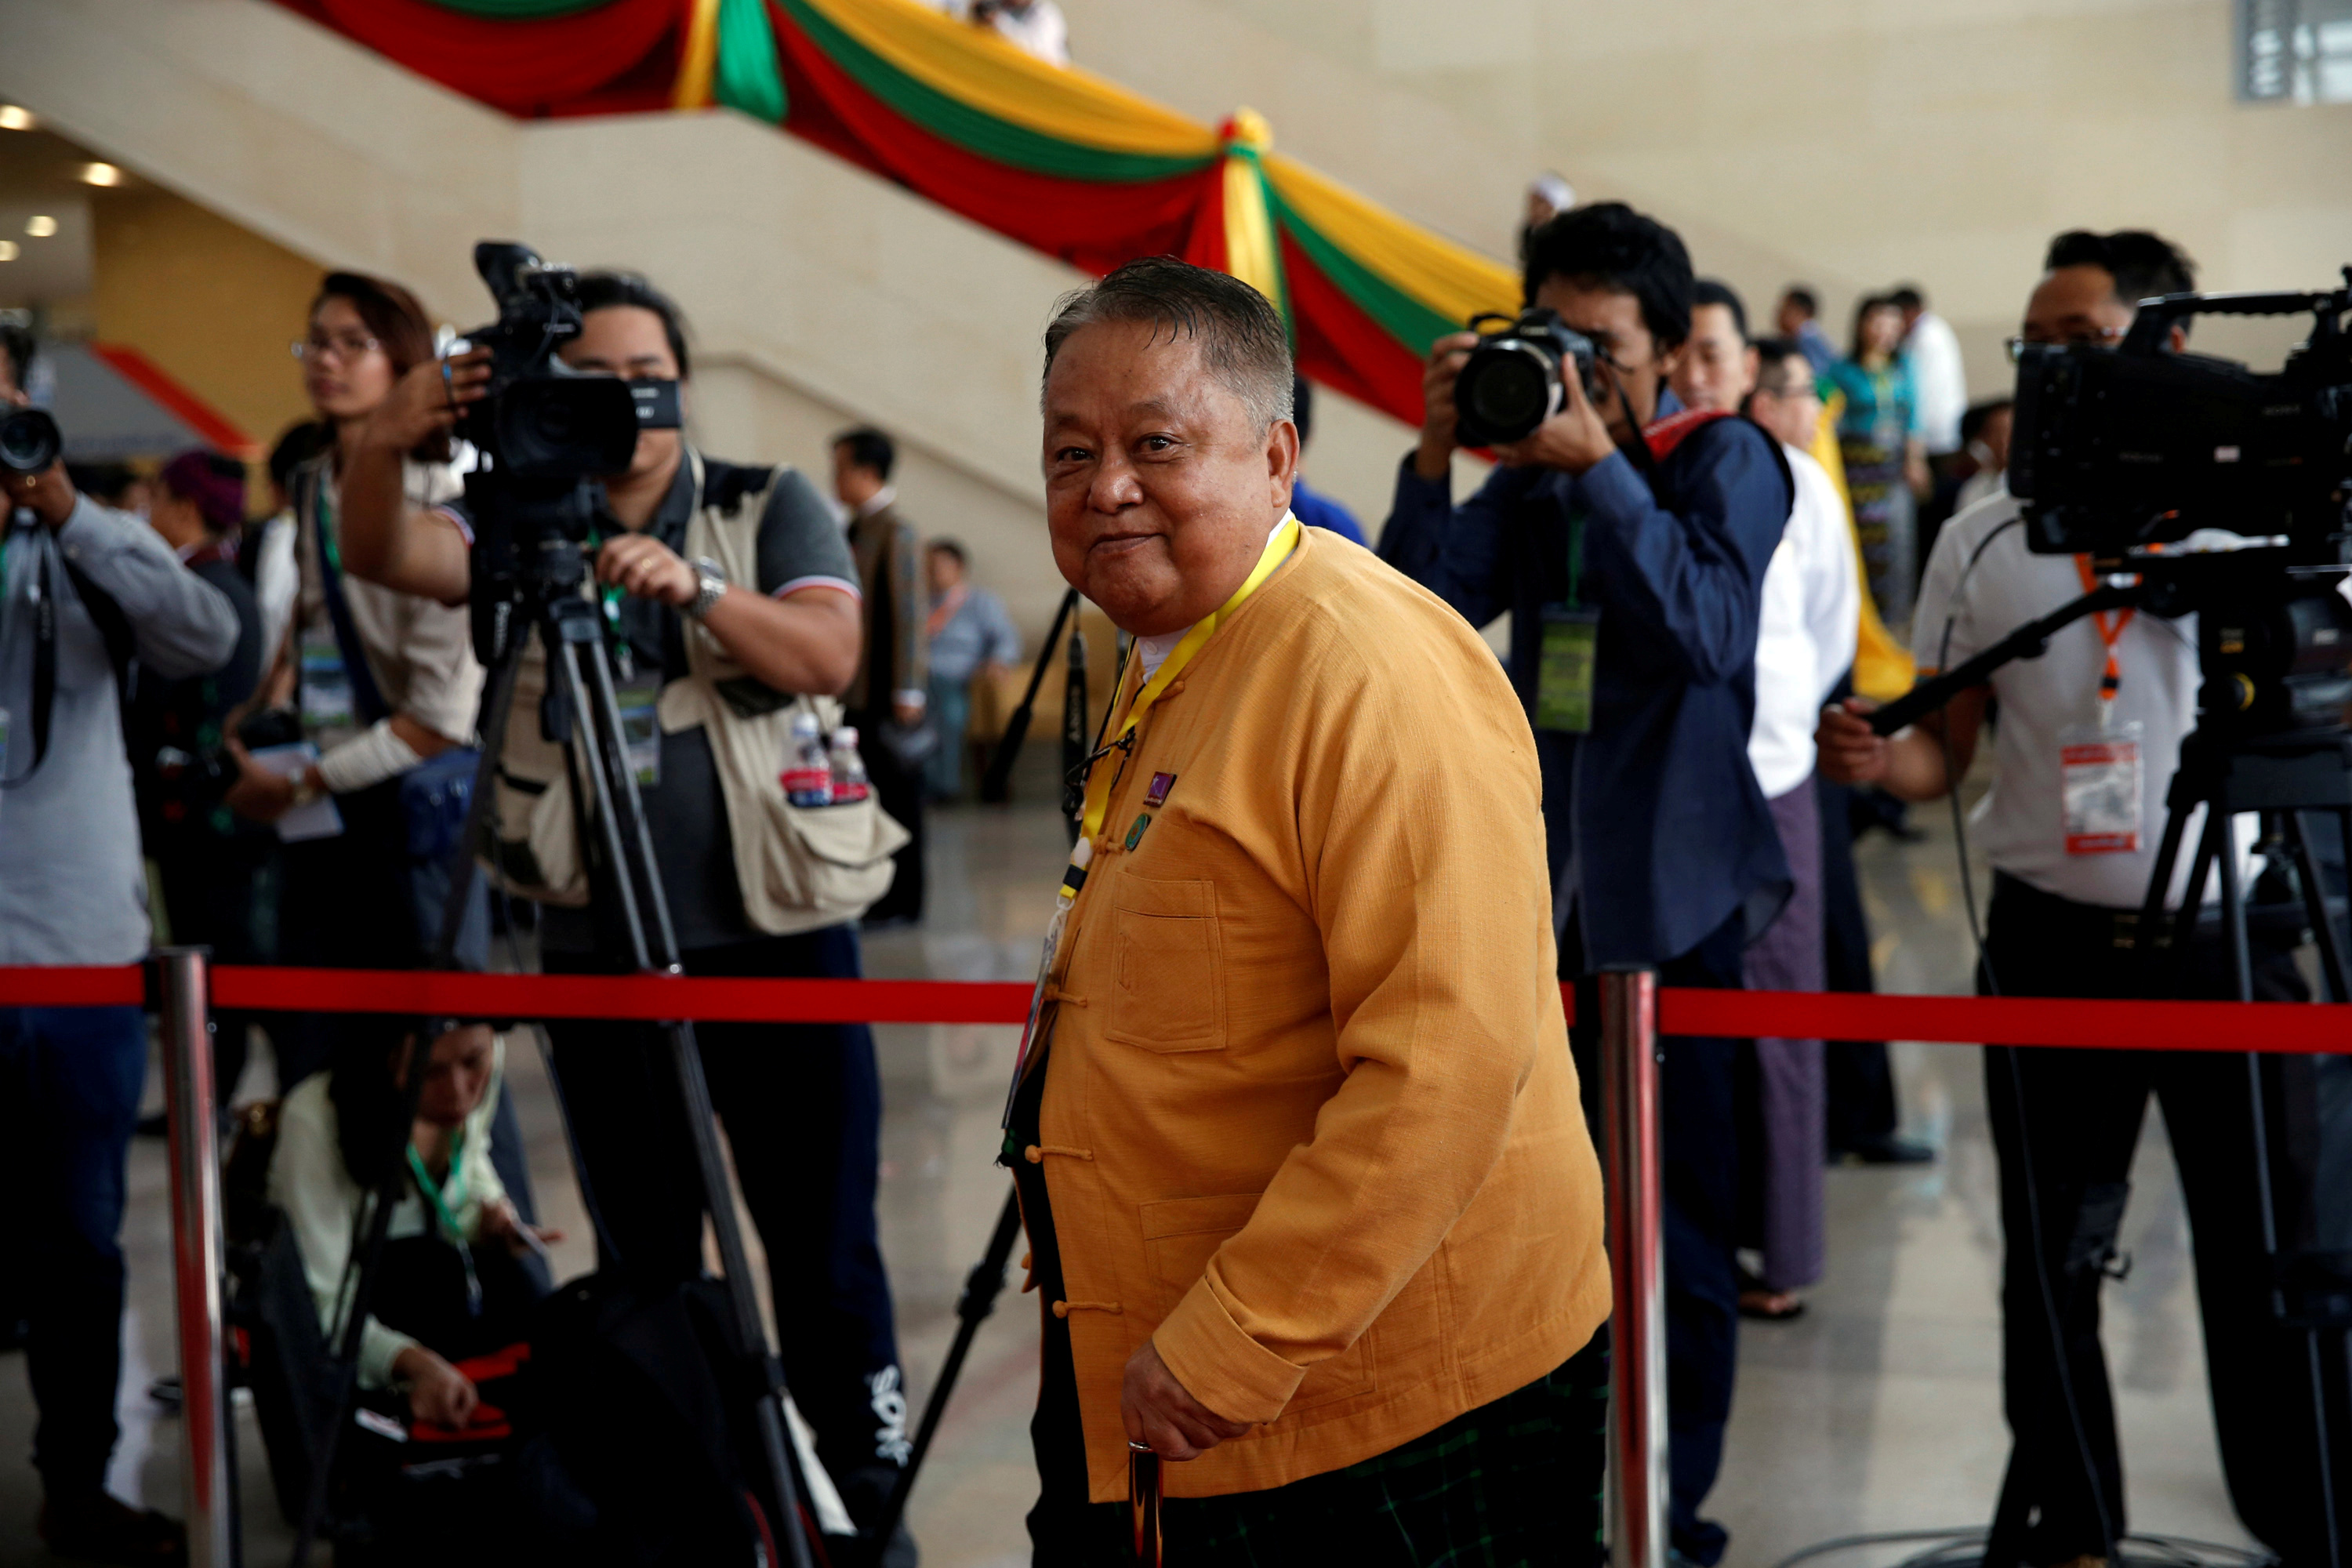 Win Htein, one of the leaders of National League for Democracy party, arrives to attend opening ceremony of 21st Century Panglong conference in Naypyitaw